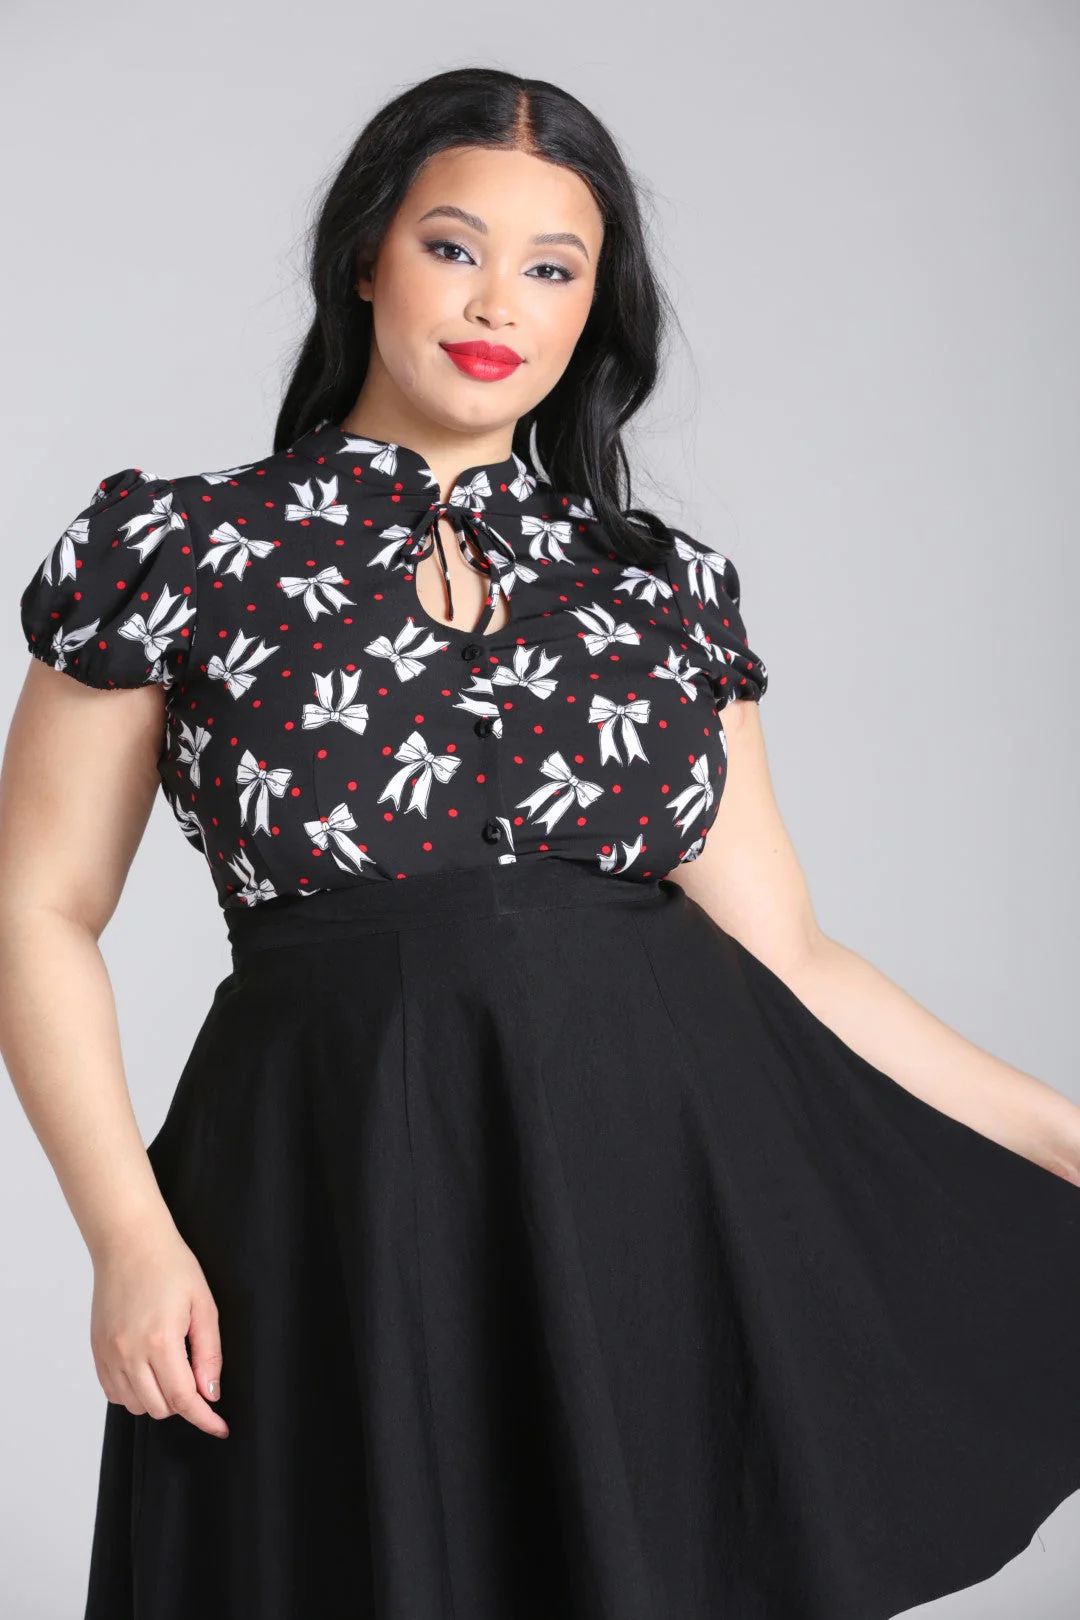 PS60270bbbbbb-chemisier-blouse-pin-up-rockabilly-50-s-retro-hell-bunny-bobbie